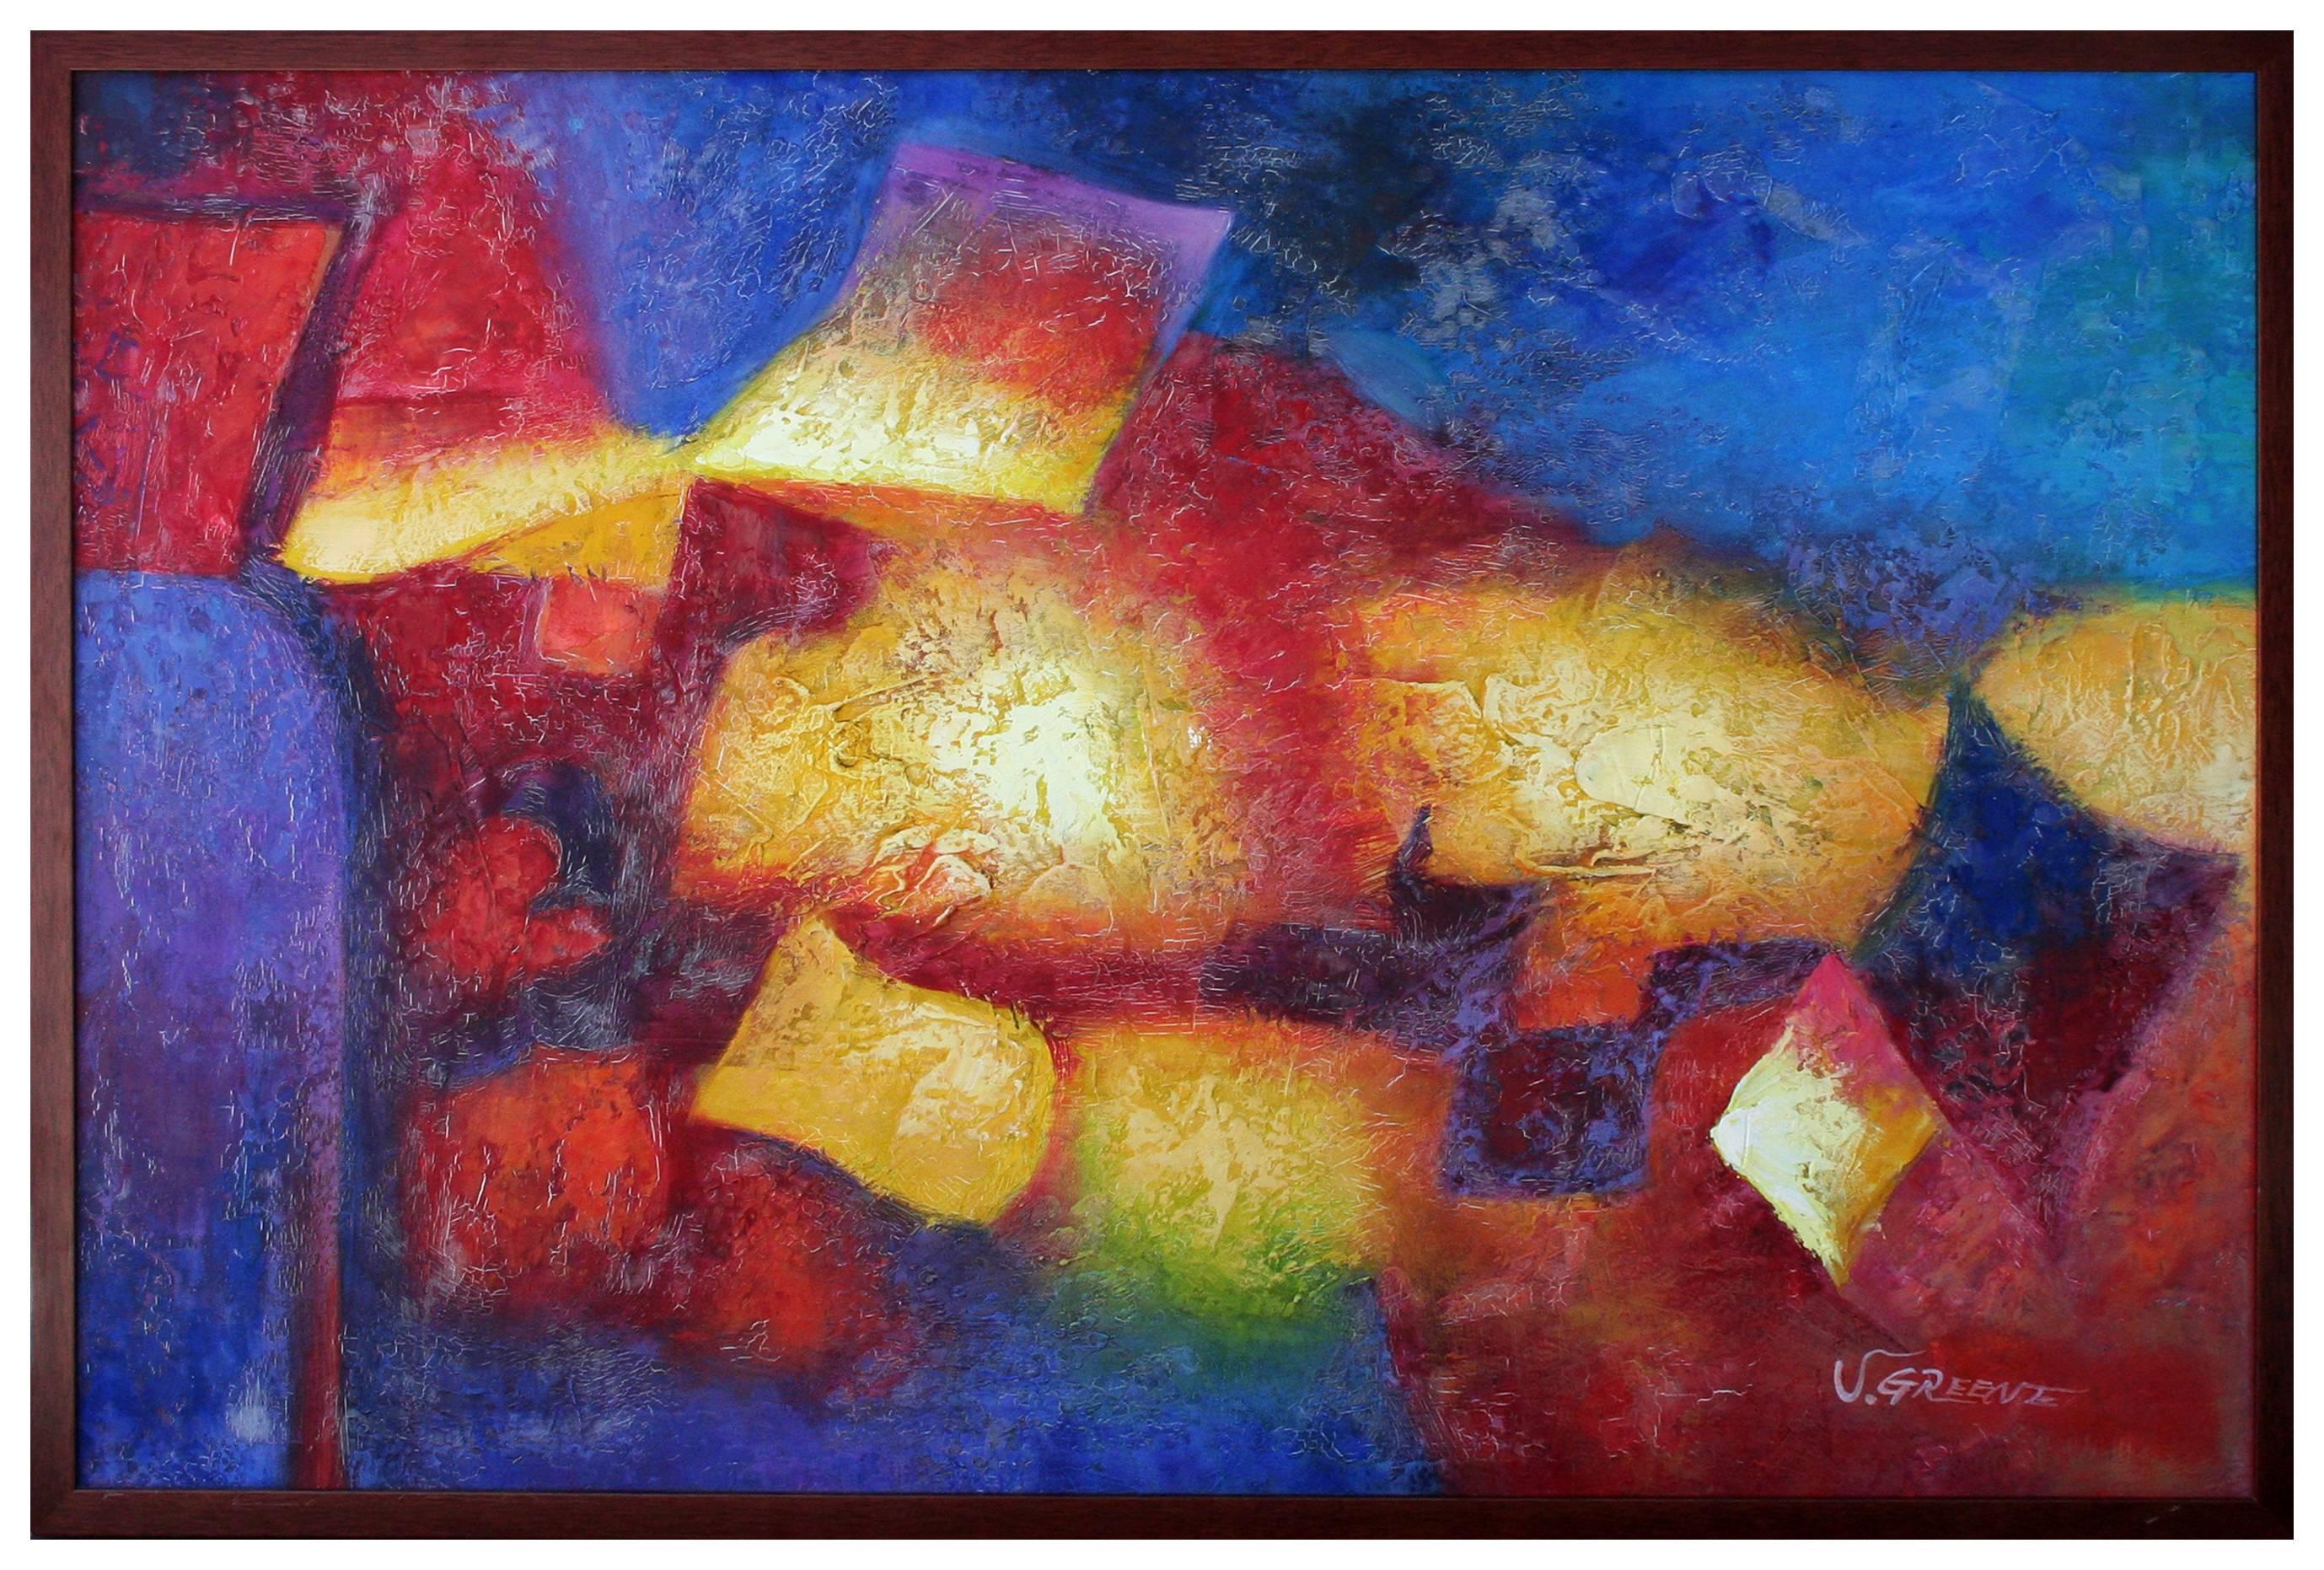 J. Greene Abstract Painting - Red and Blue Abstract - Original Oil On Canvas